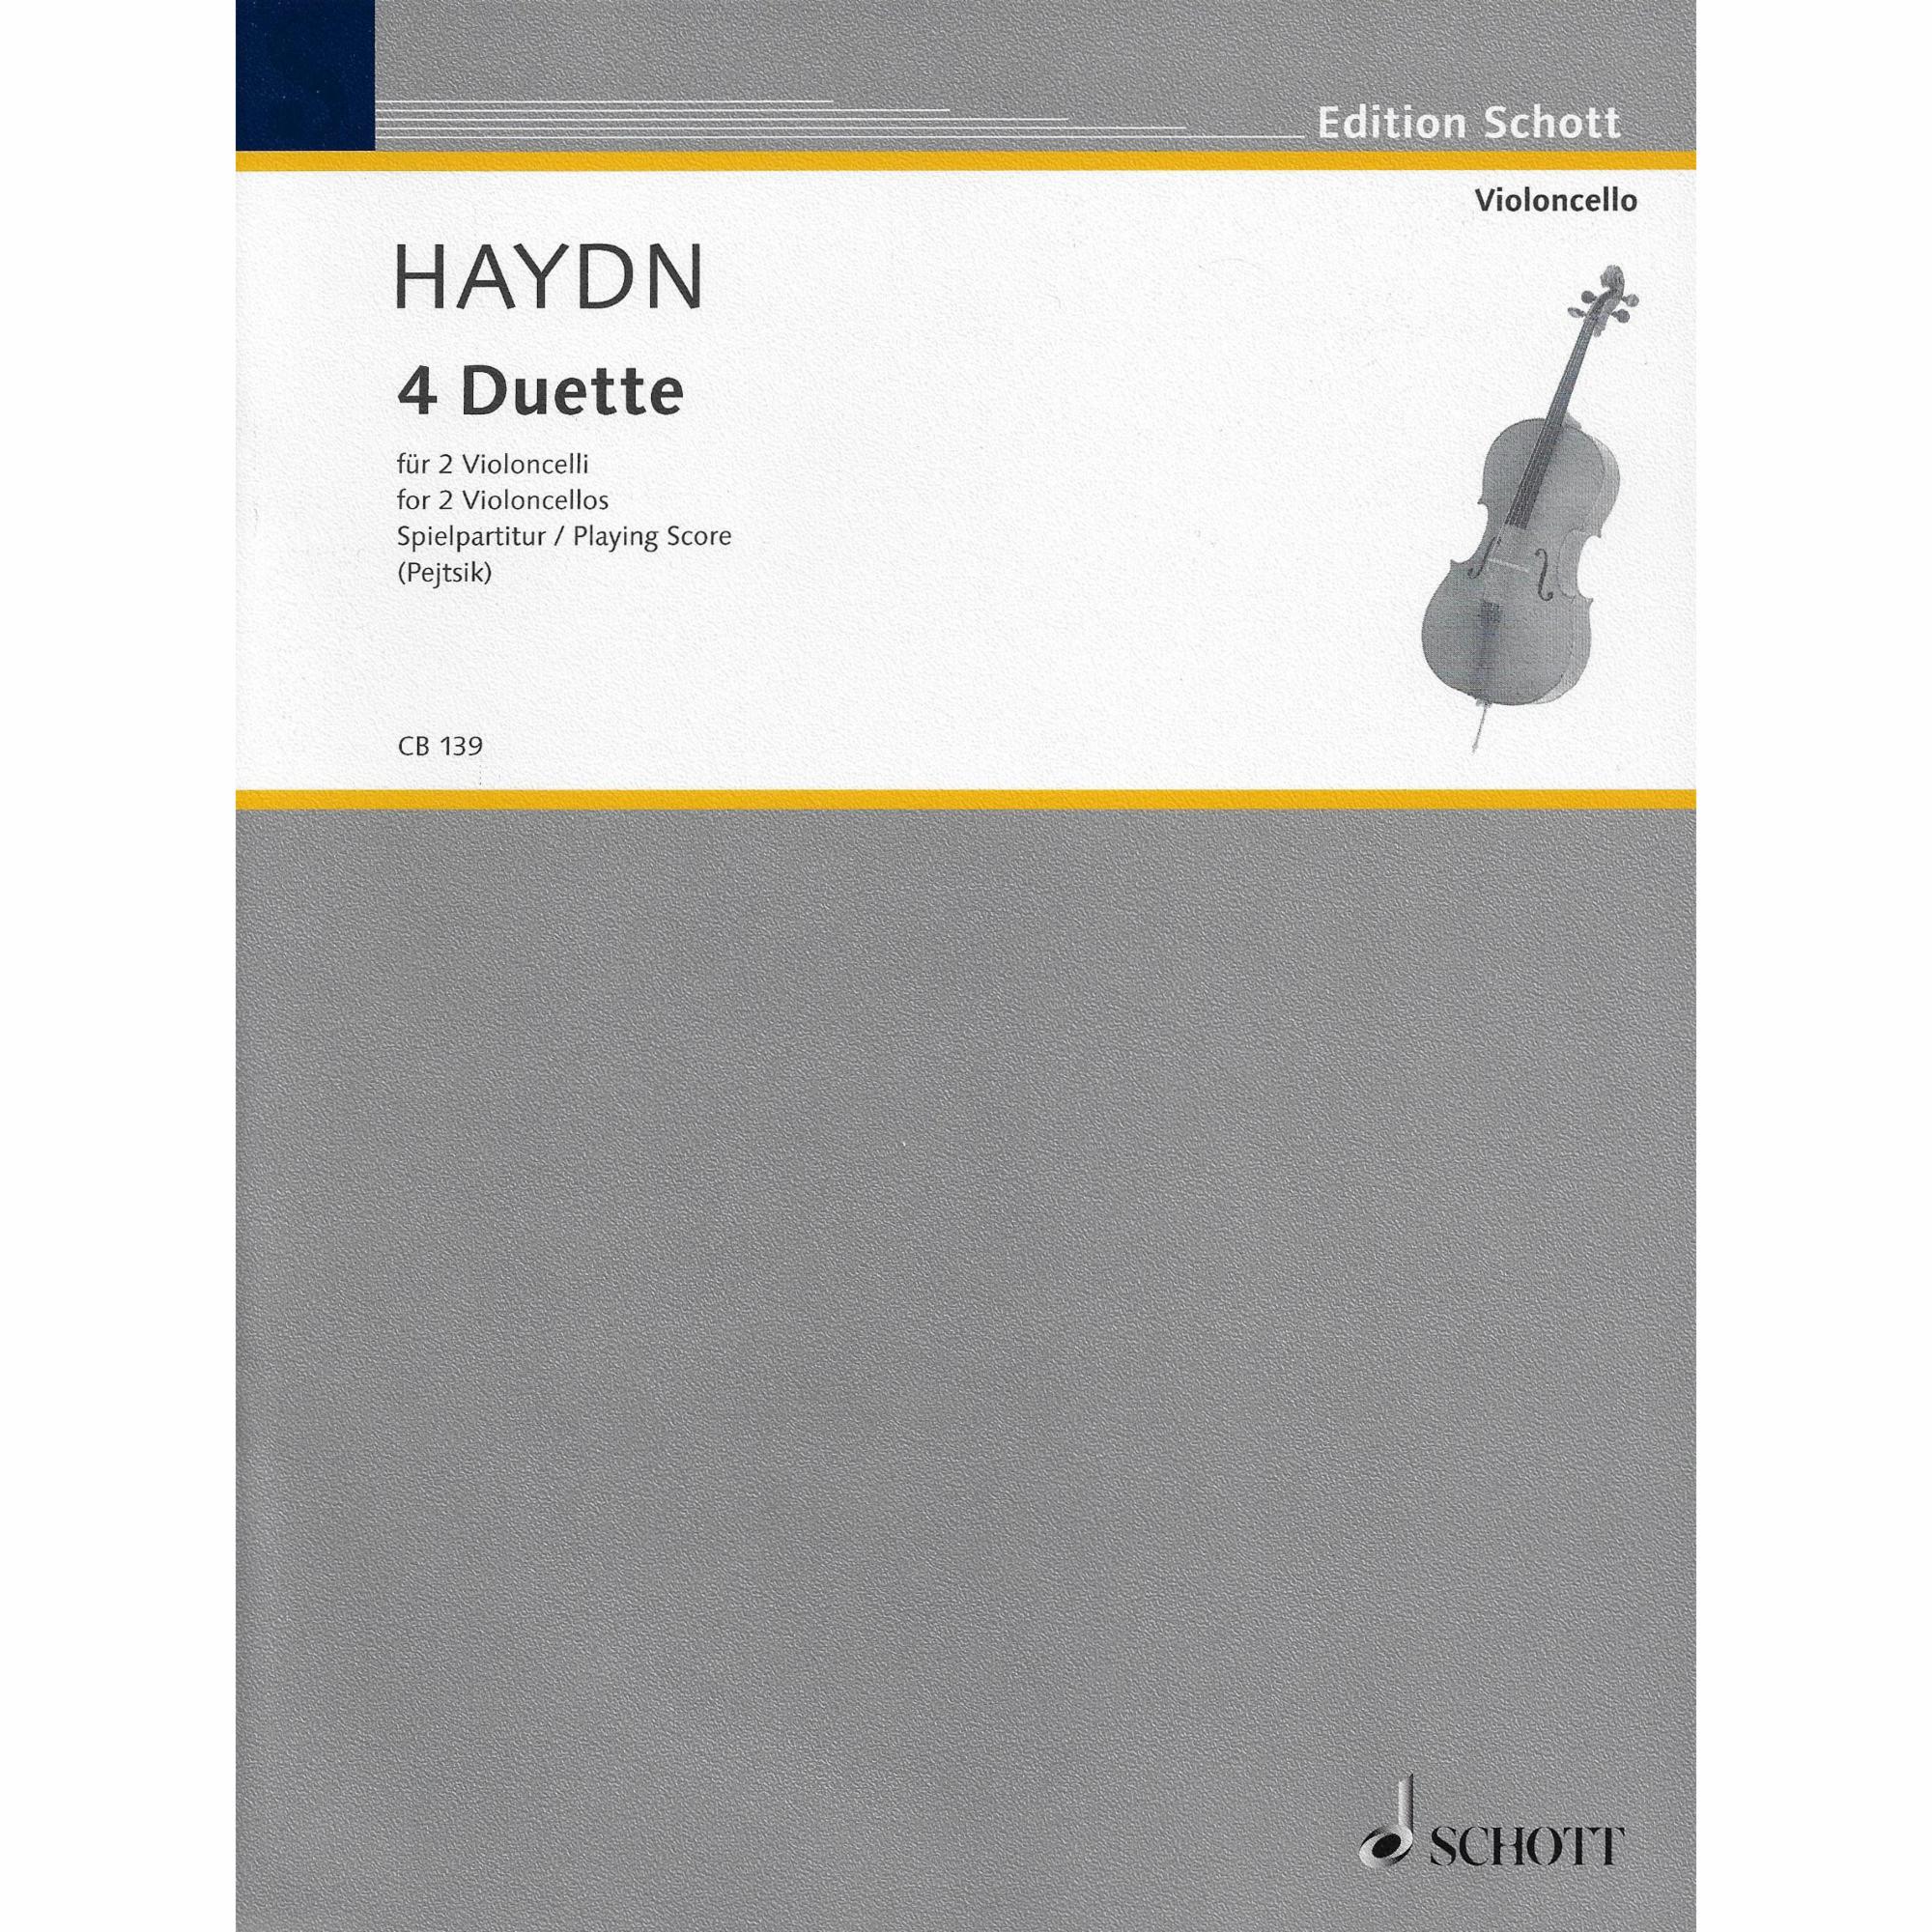 Haydn -- Four Duets for Two Cellos